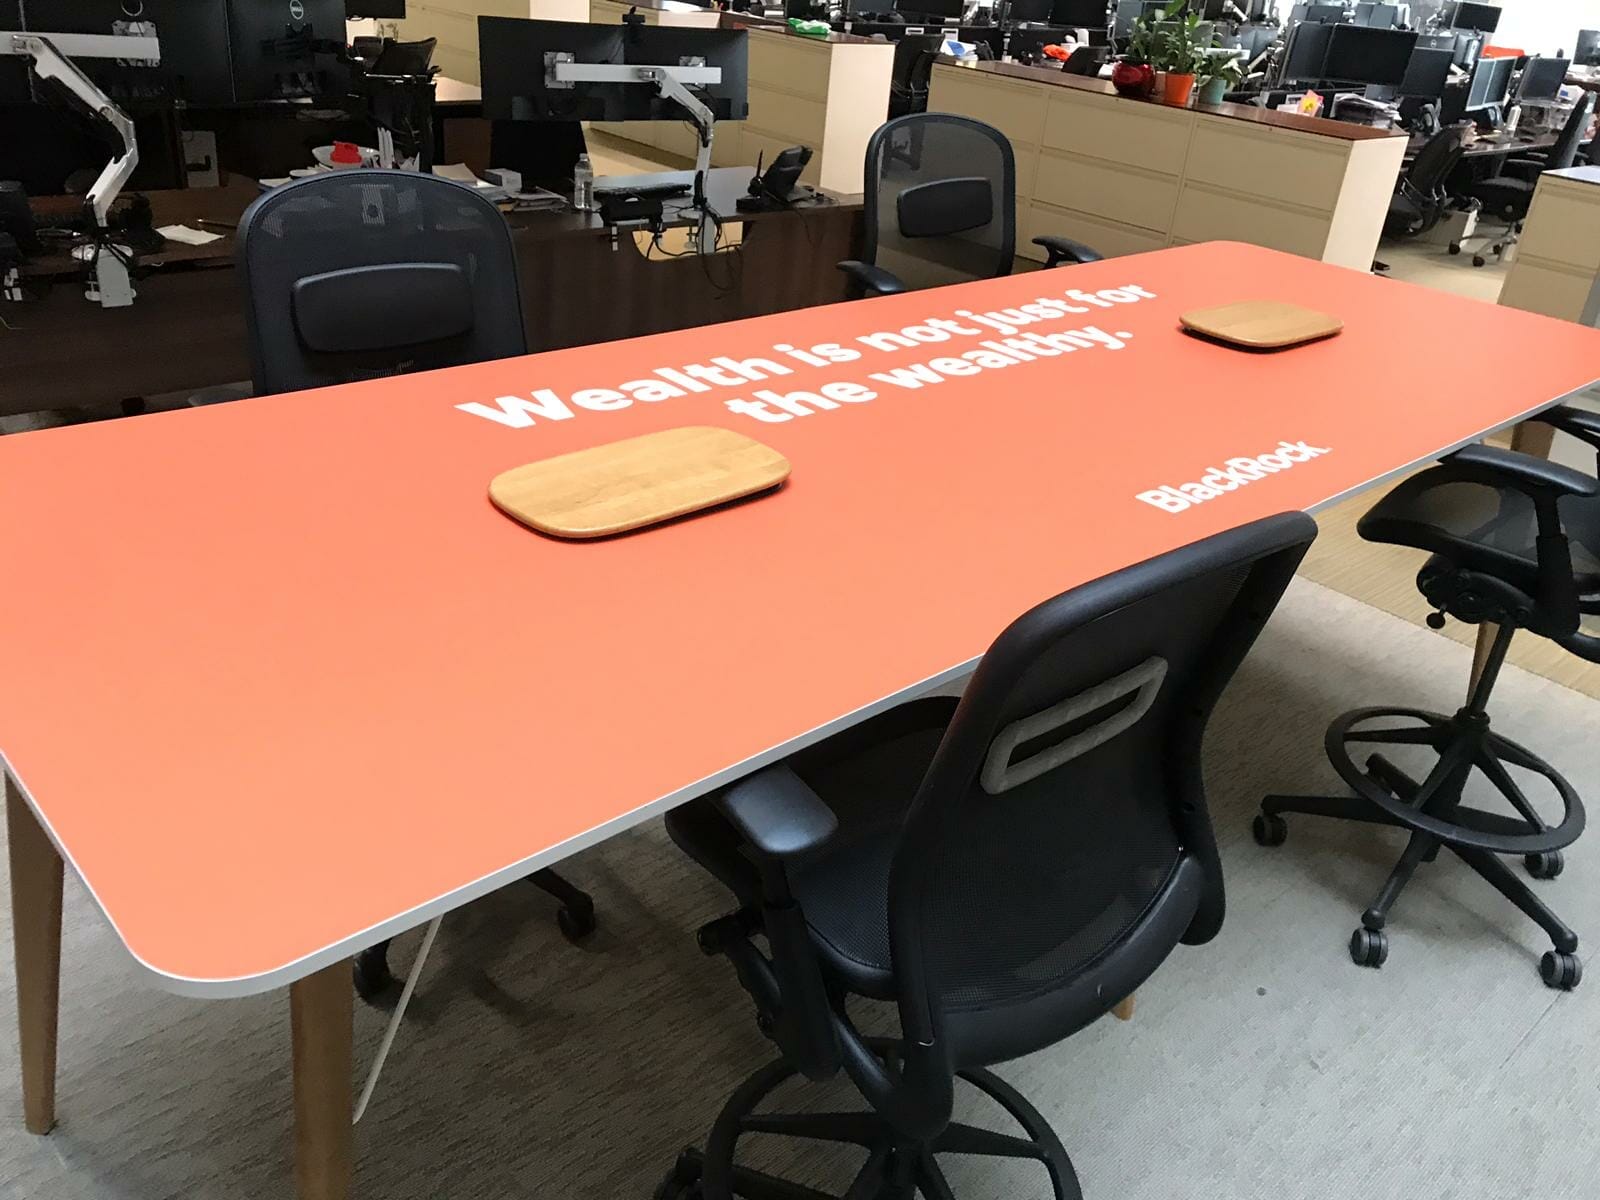 Office graphics on a table